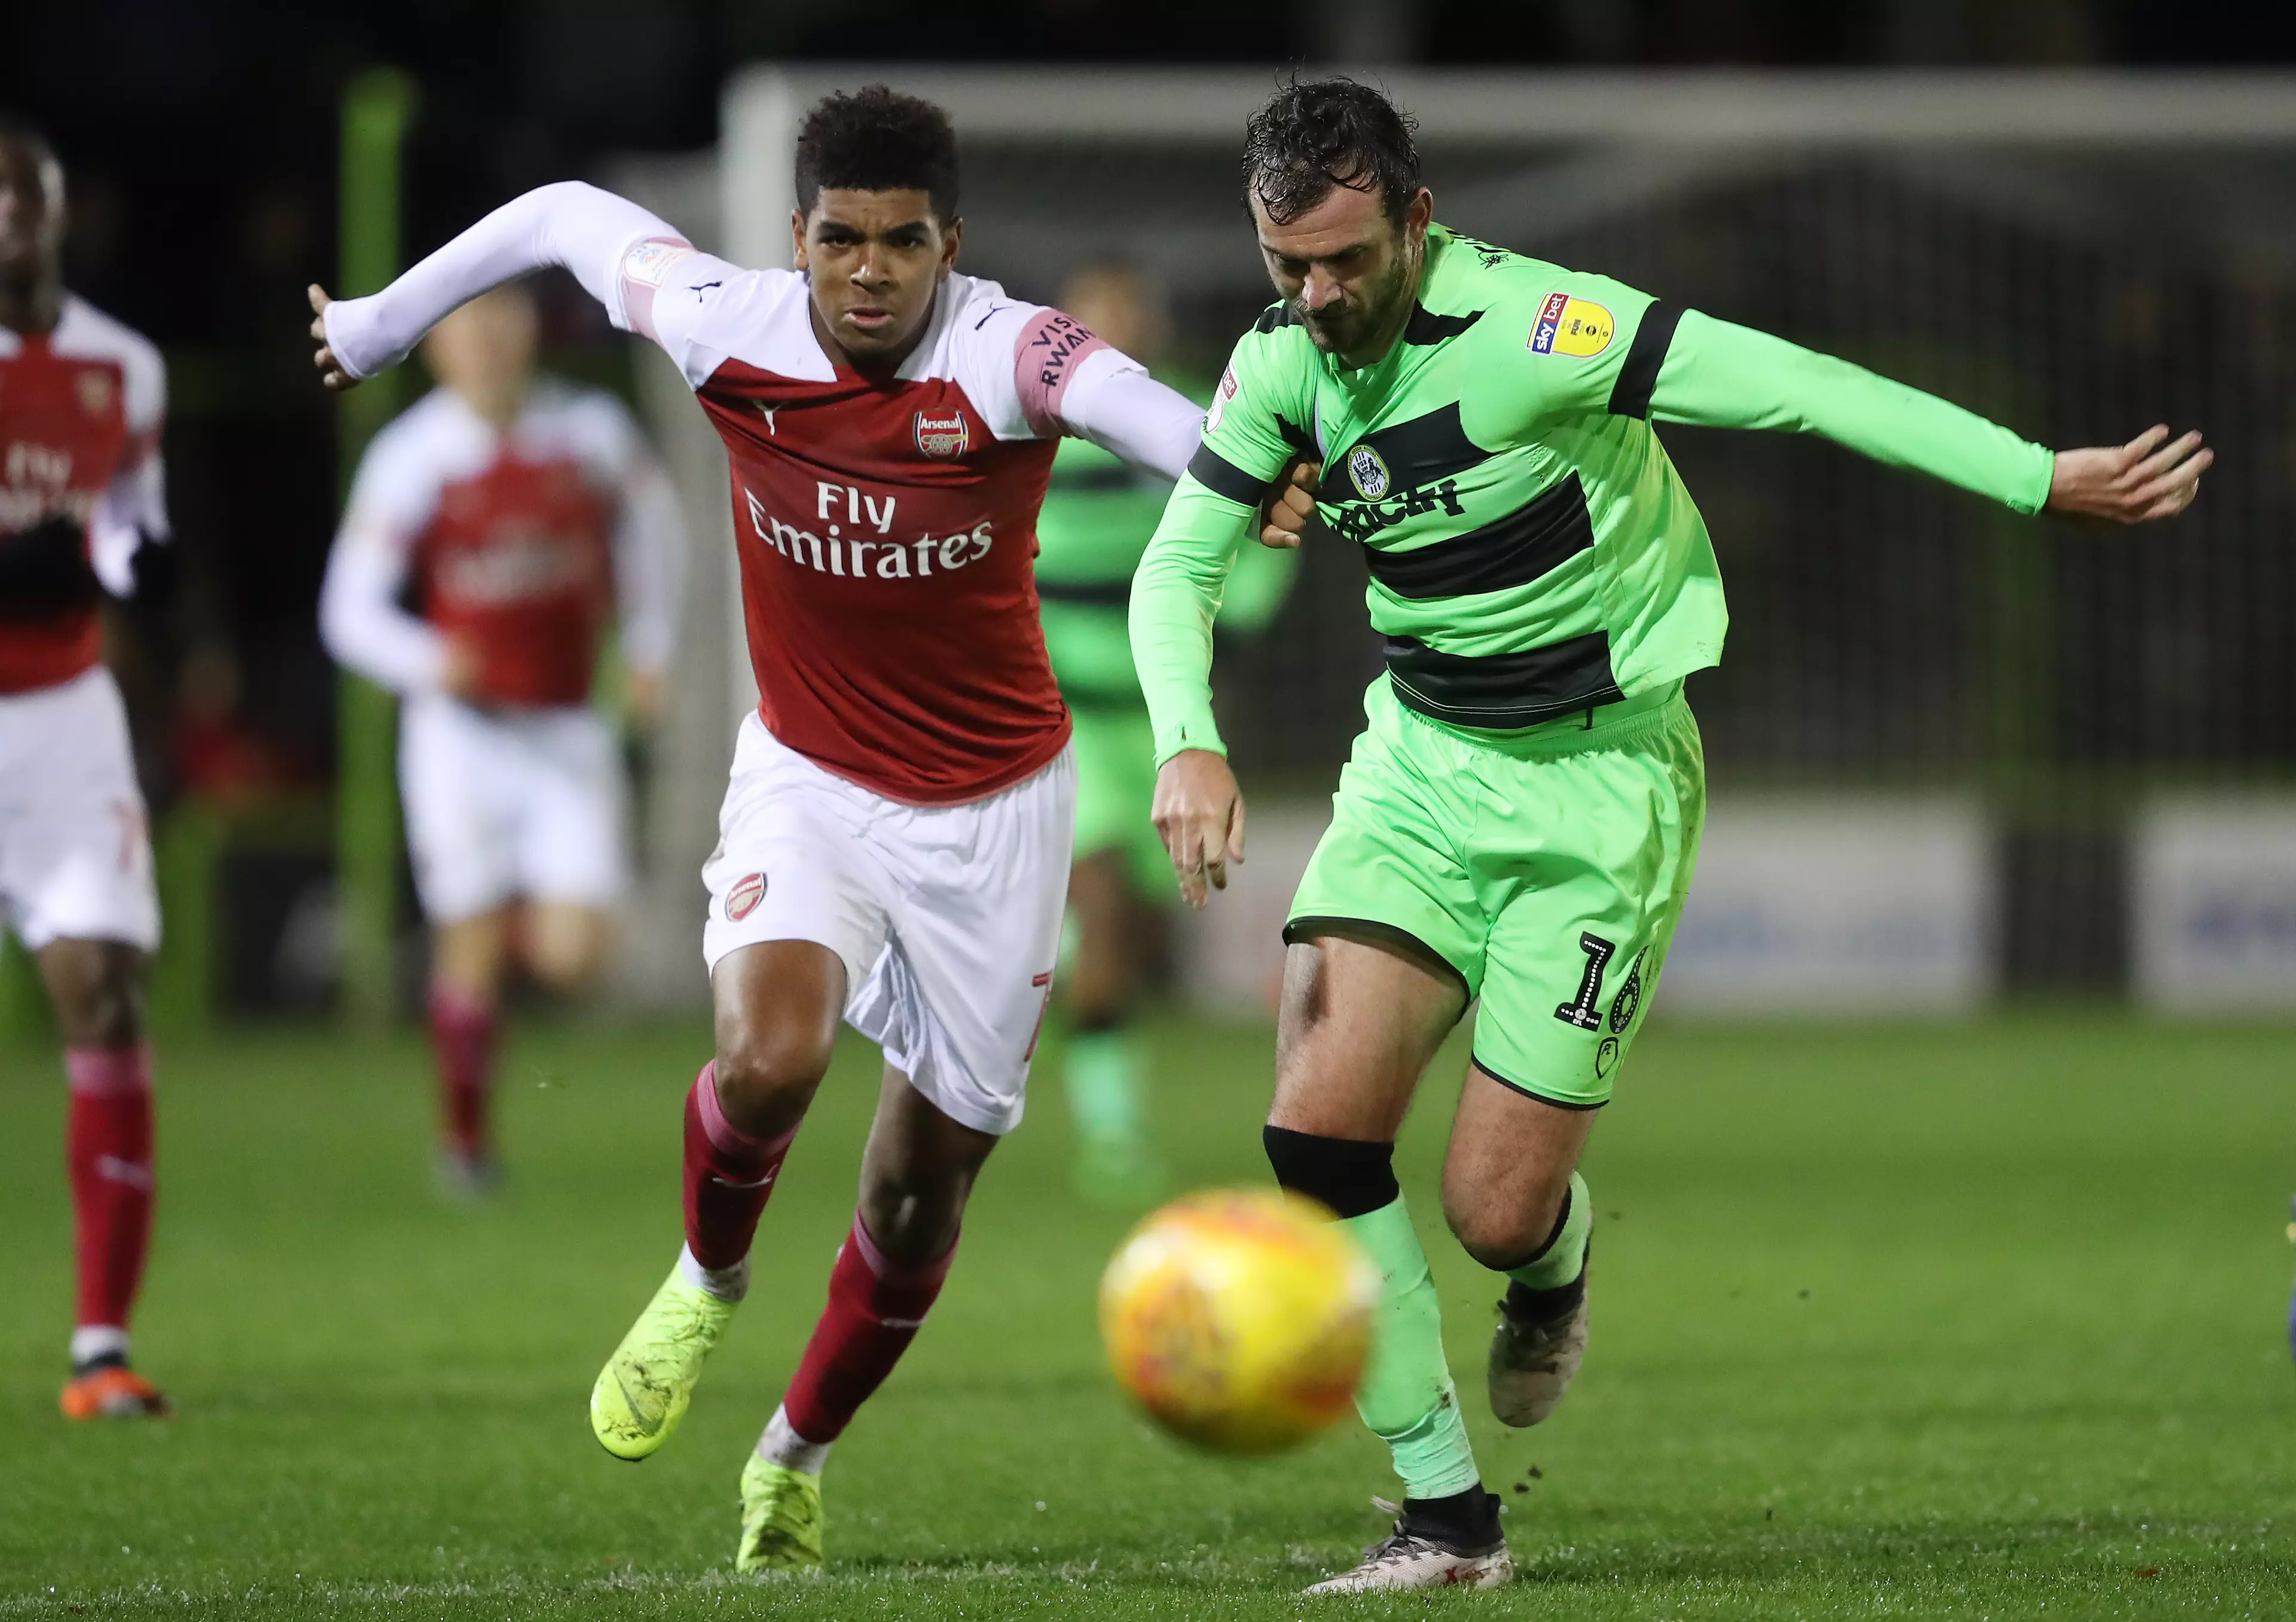 John-Jules in action against Forest Green Rovers (Image